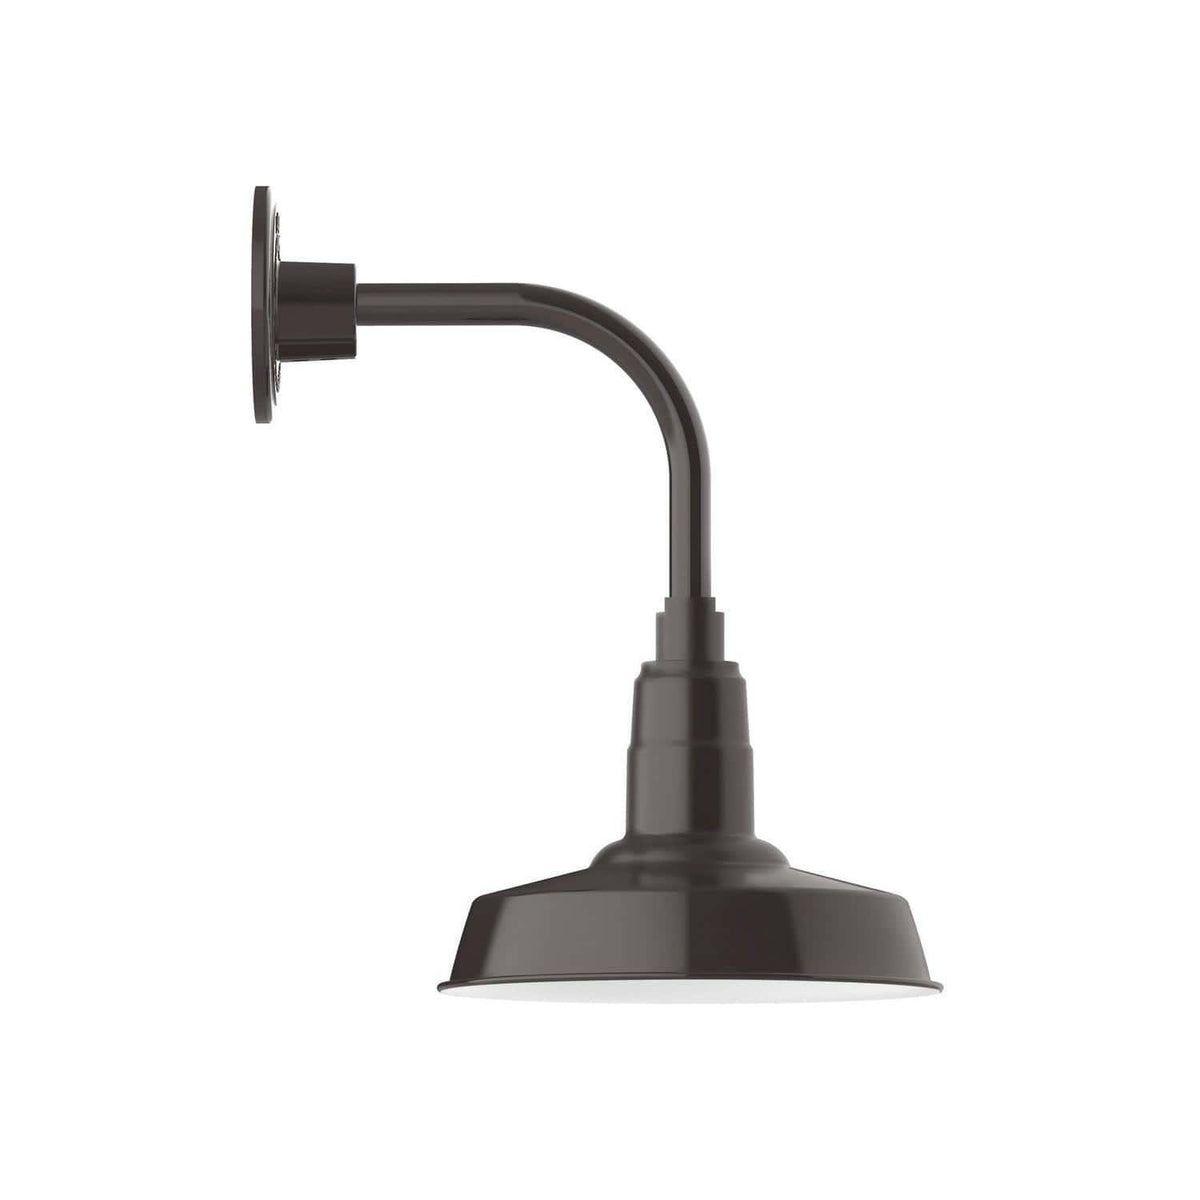 Montclair Light Works - Warehouse 10" Curved Arm Wall Light - GNT181-51 | Montreal Lighting & Hardware